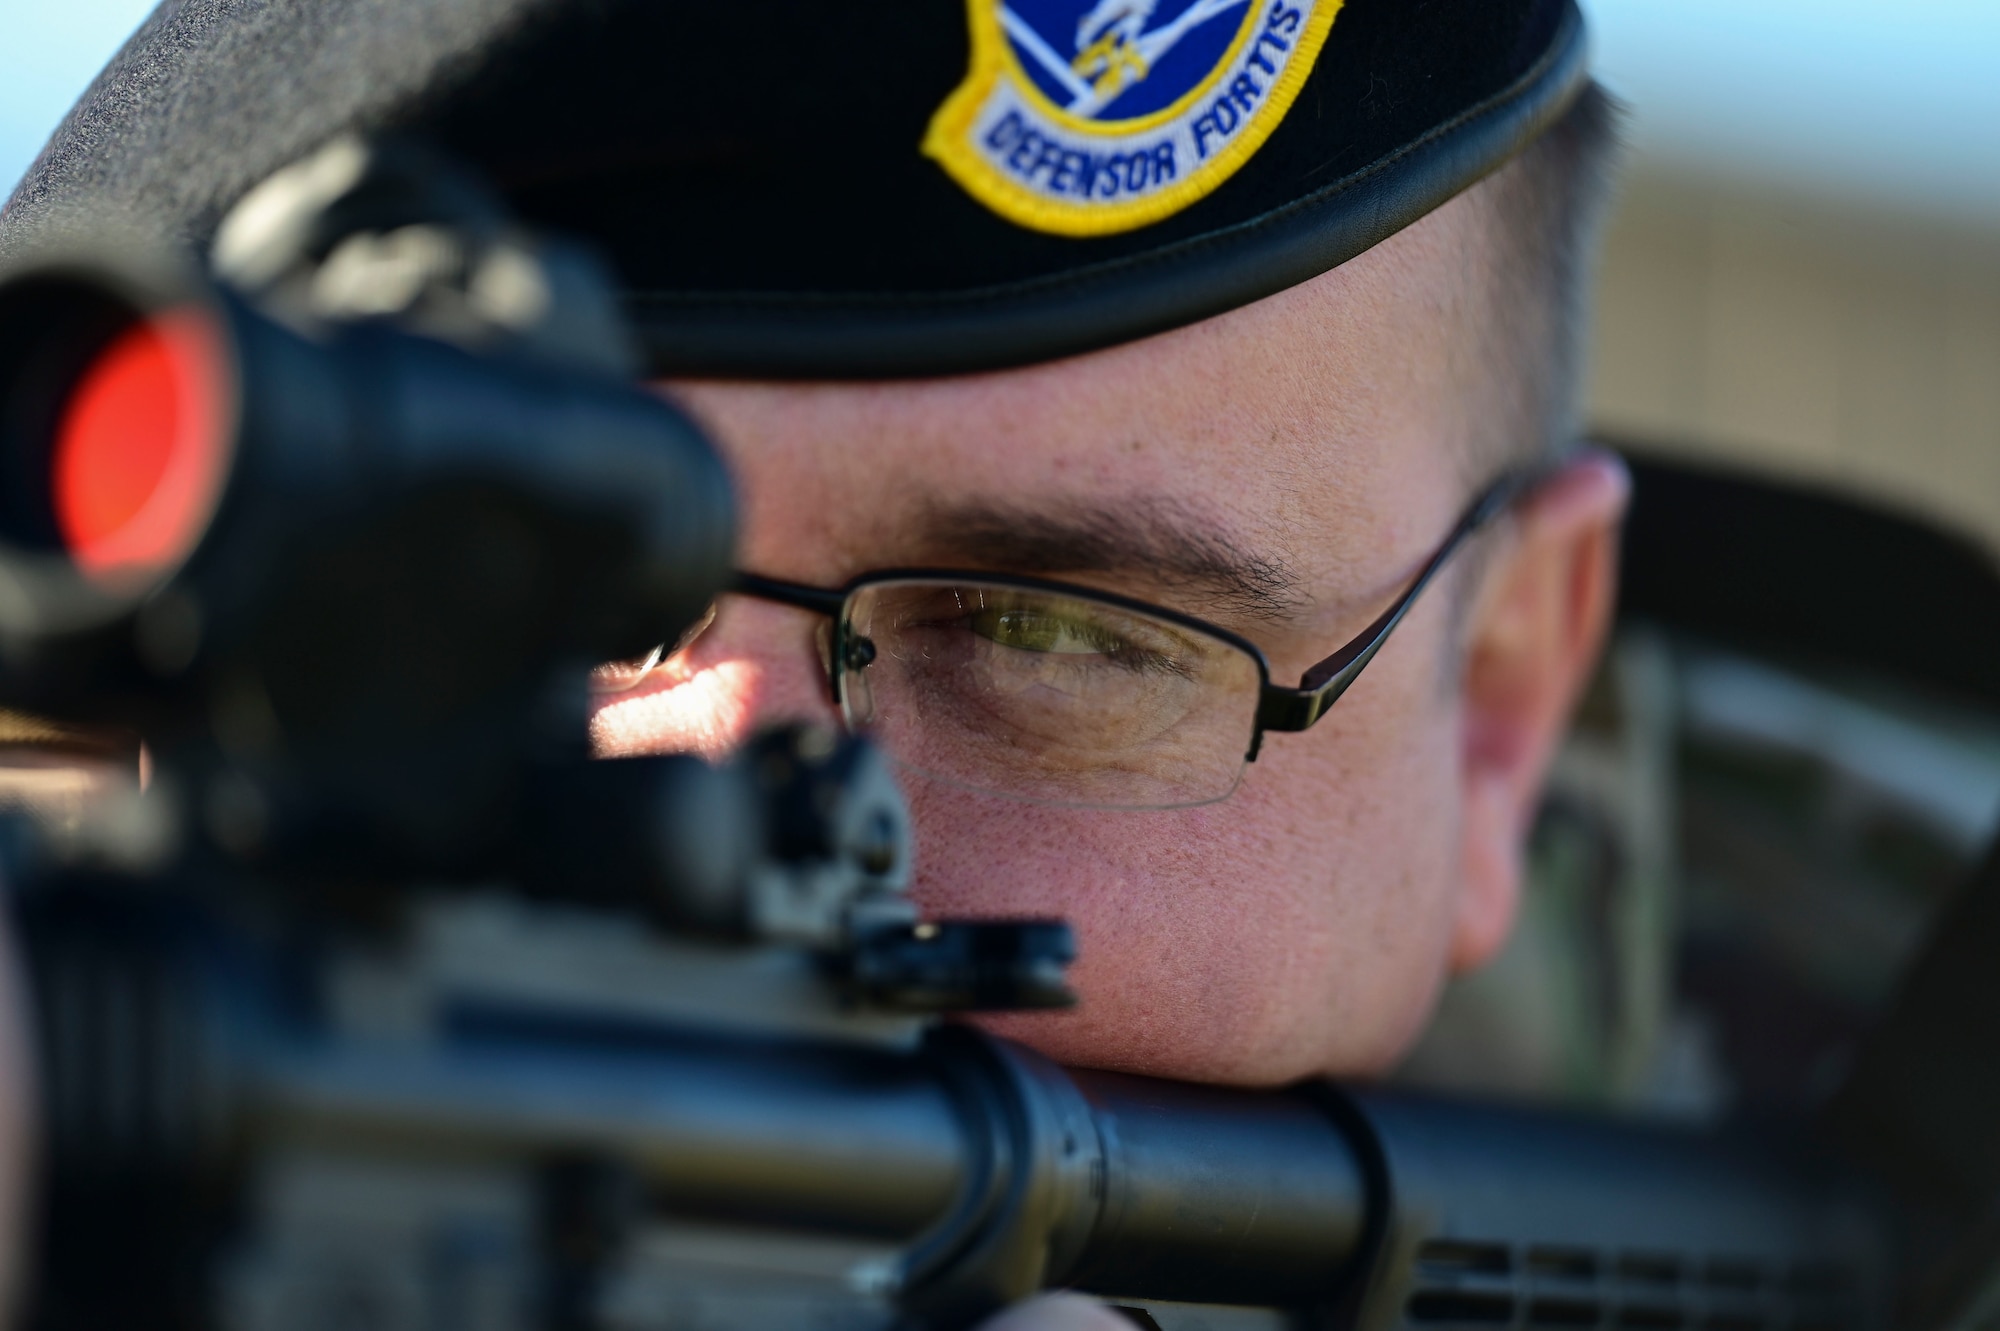 U.S. Air Force Master Sgt. Eric Emerson, 17th Security Forces Squadron standardization and evaluation superintendent, aims a rifle, Goodfellow Air Force Base, Texas, Dec. 5, 2023. Before joining the military, Emerson wanted to pursue a career in law enforcement. When he was cut from the San Angelo Police Department hiring process, he enlisted as a security forces specialist. (U.S. Air Force photo by Airman 1st Class Madison Collier)